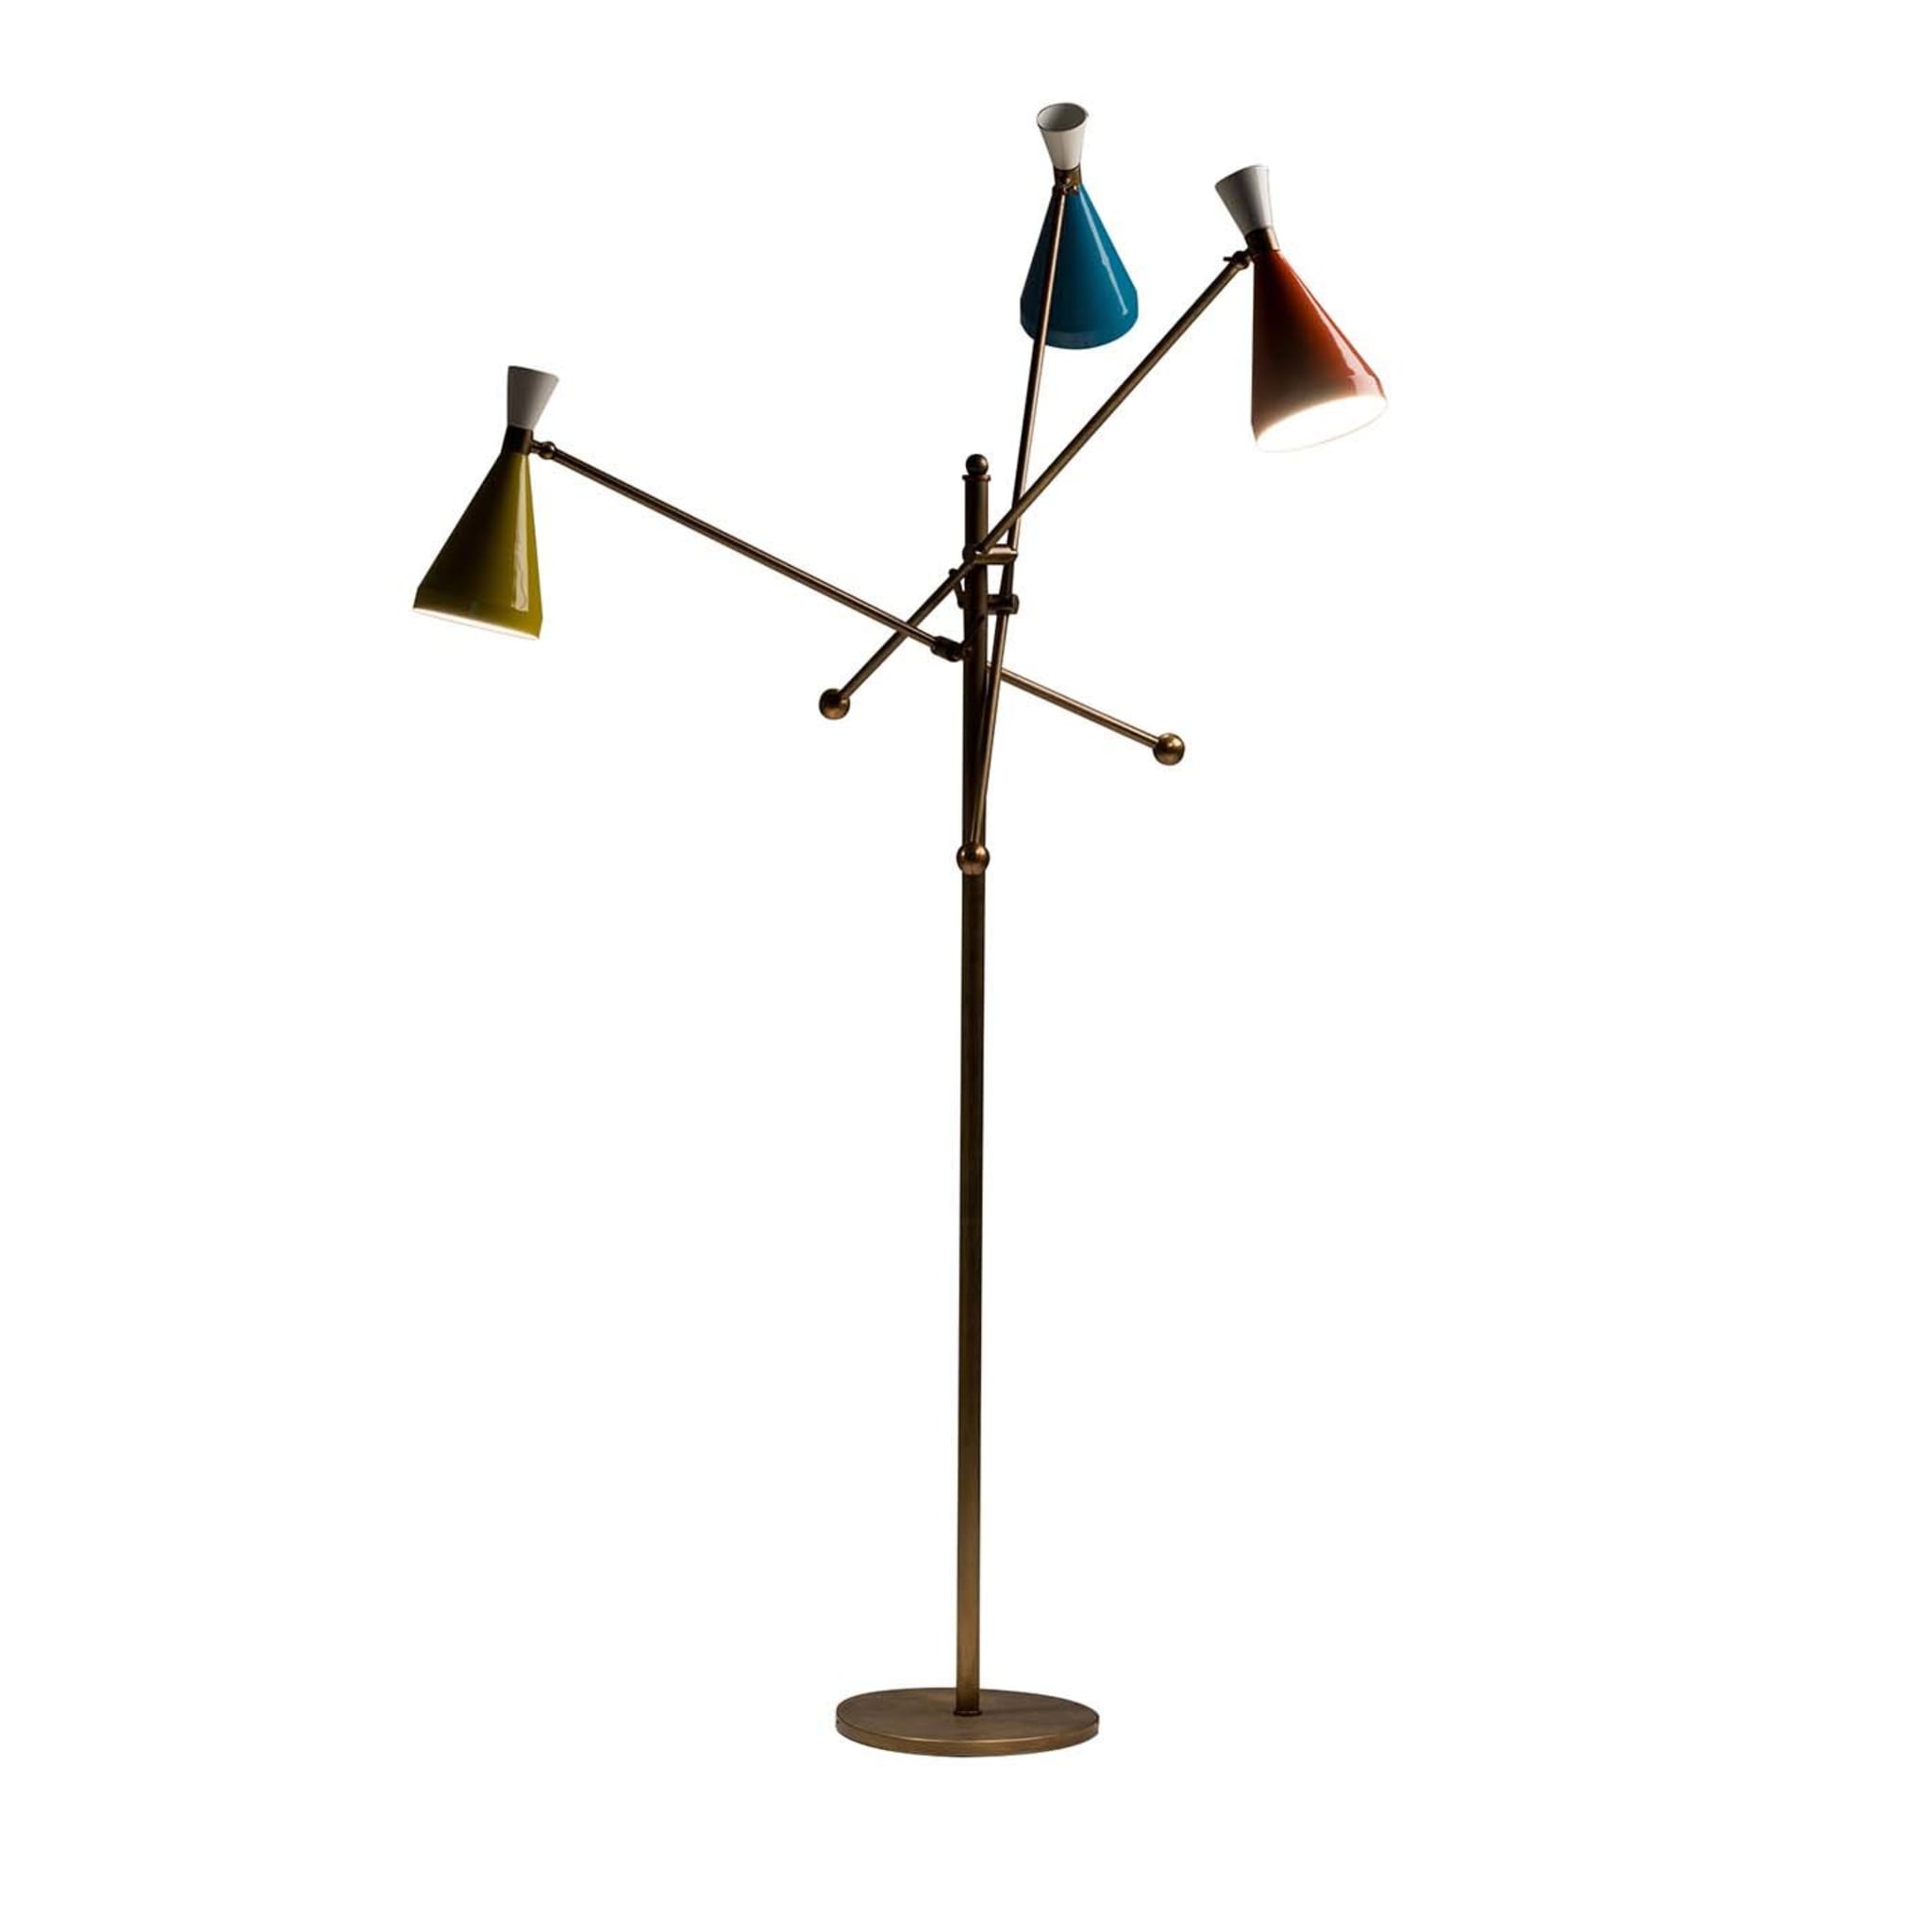 Flipper floor lamp by Marco and Giulio Mantellassi - Main view